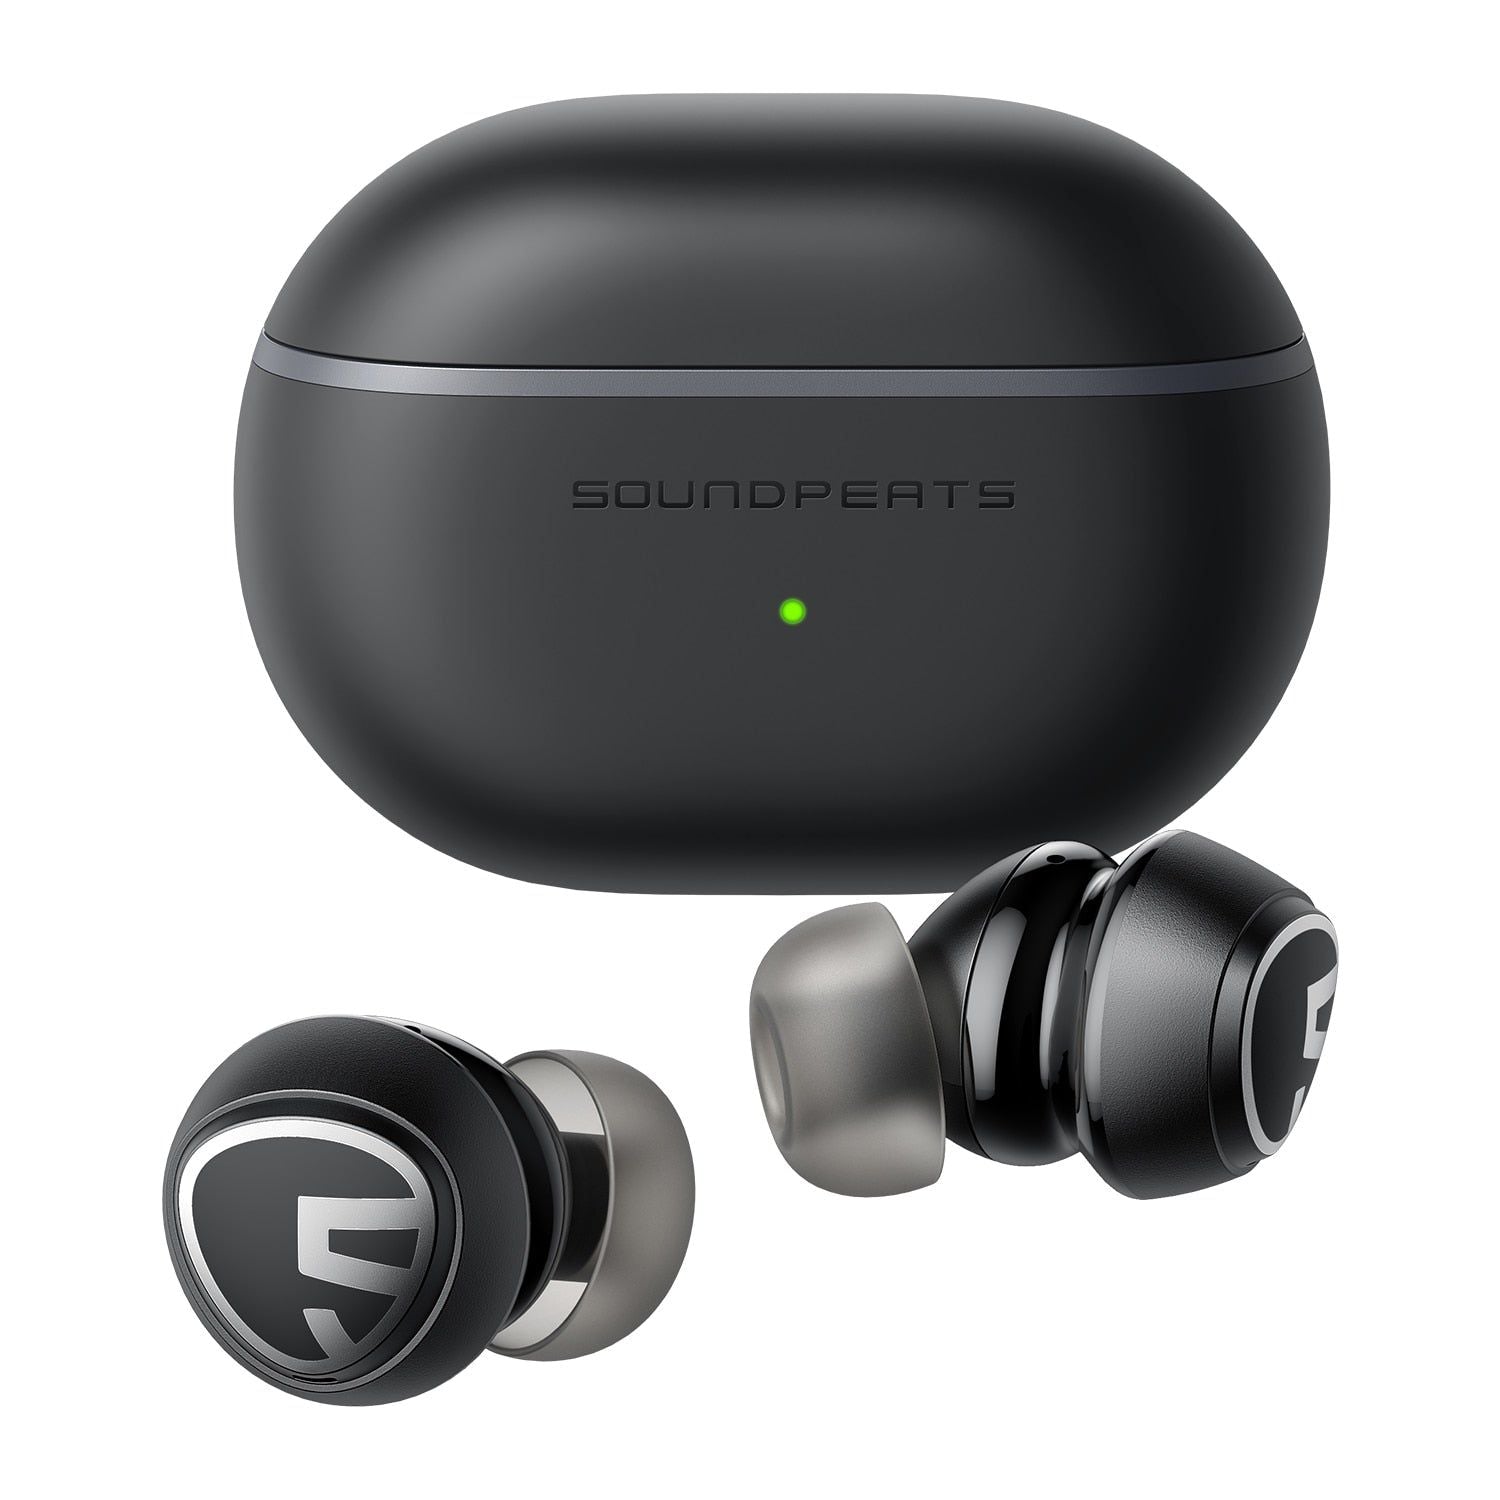 Mini Pro Wireless Earbuds With Hybrid Active Noise Cancelling Black | Hifi Media Store